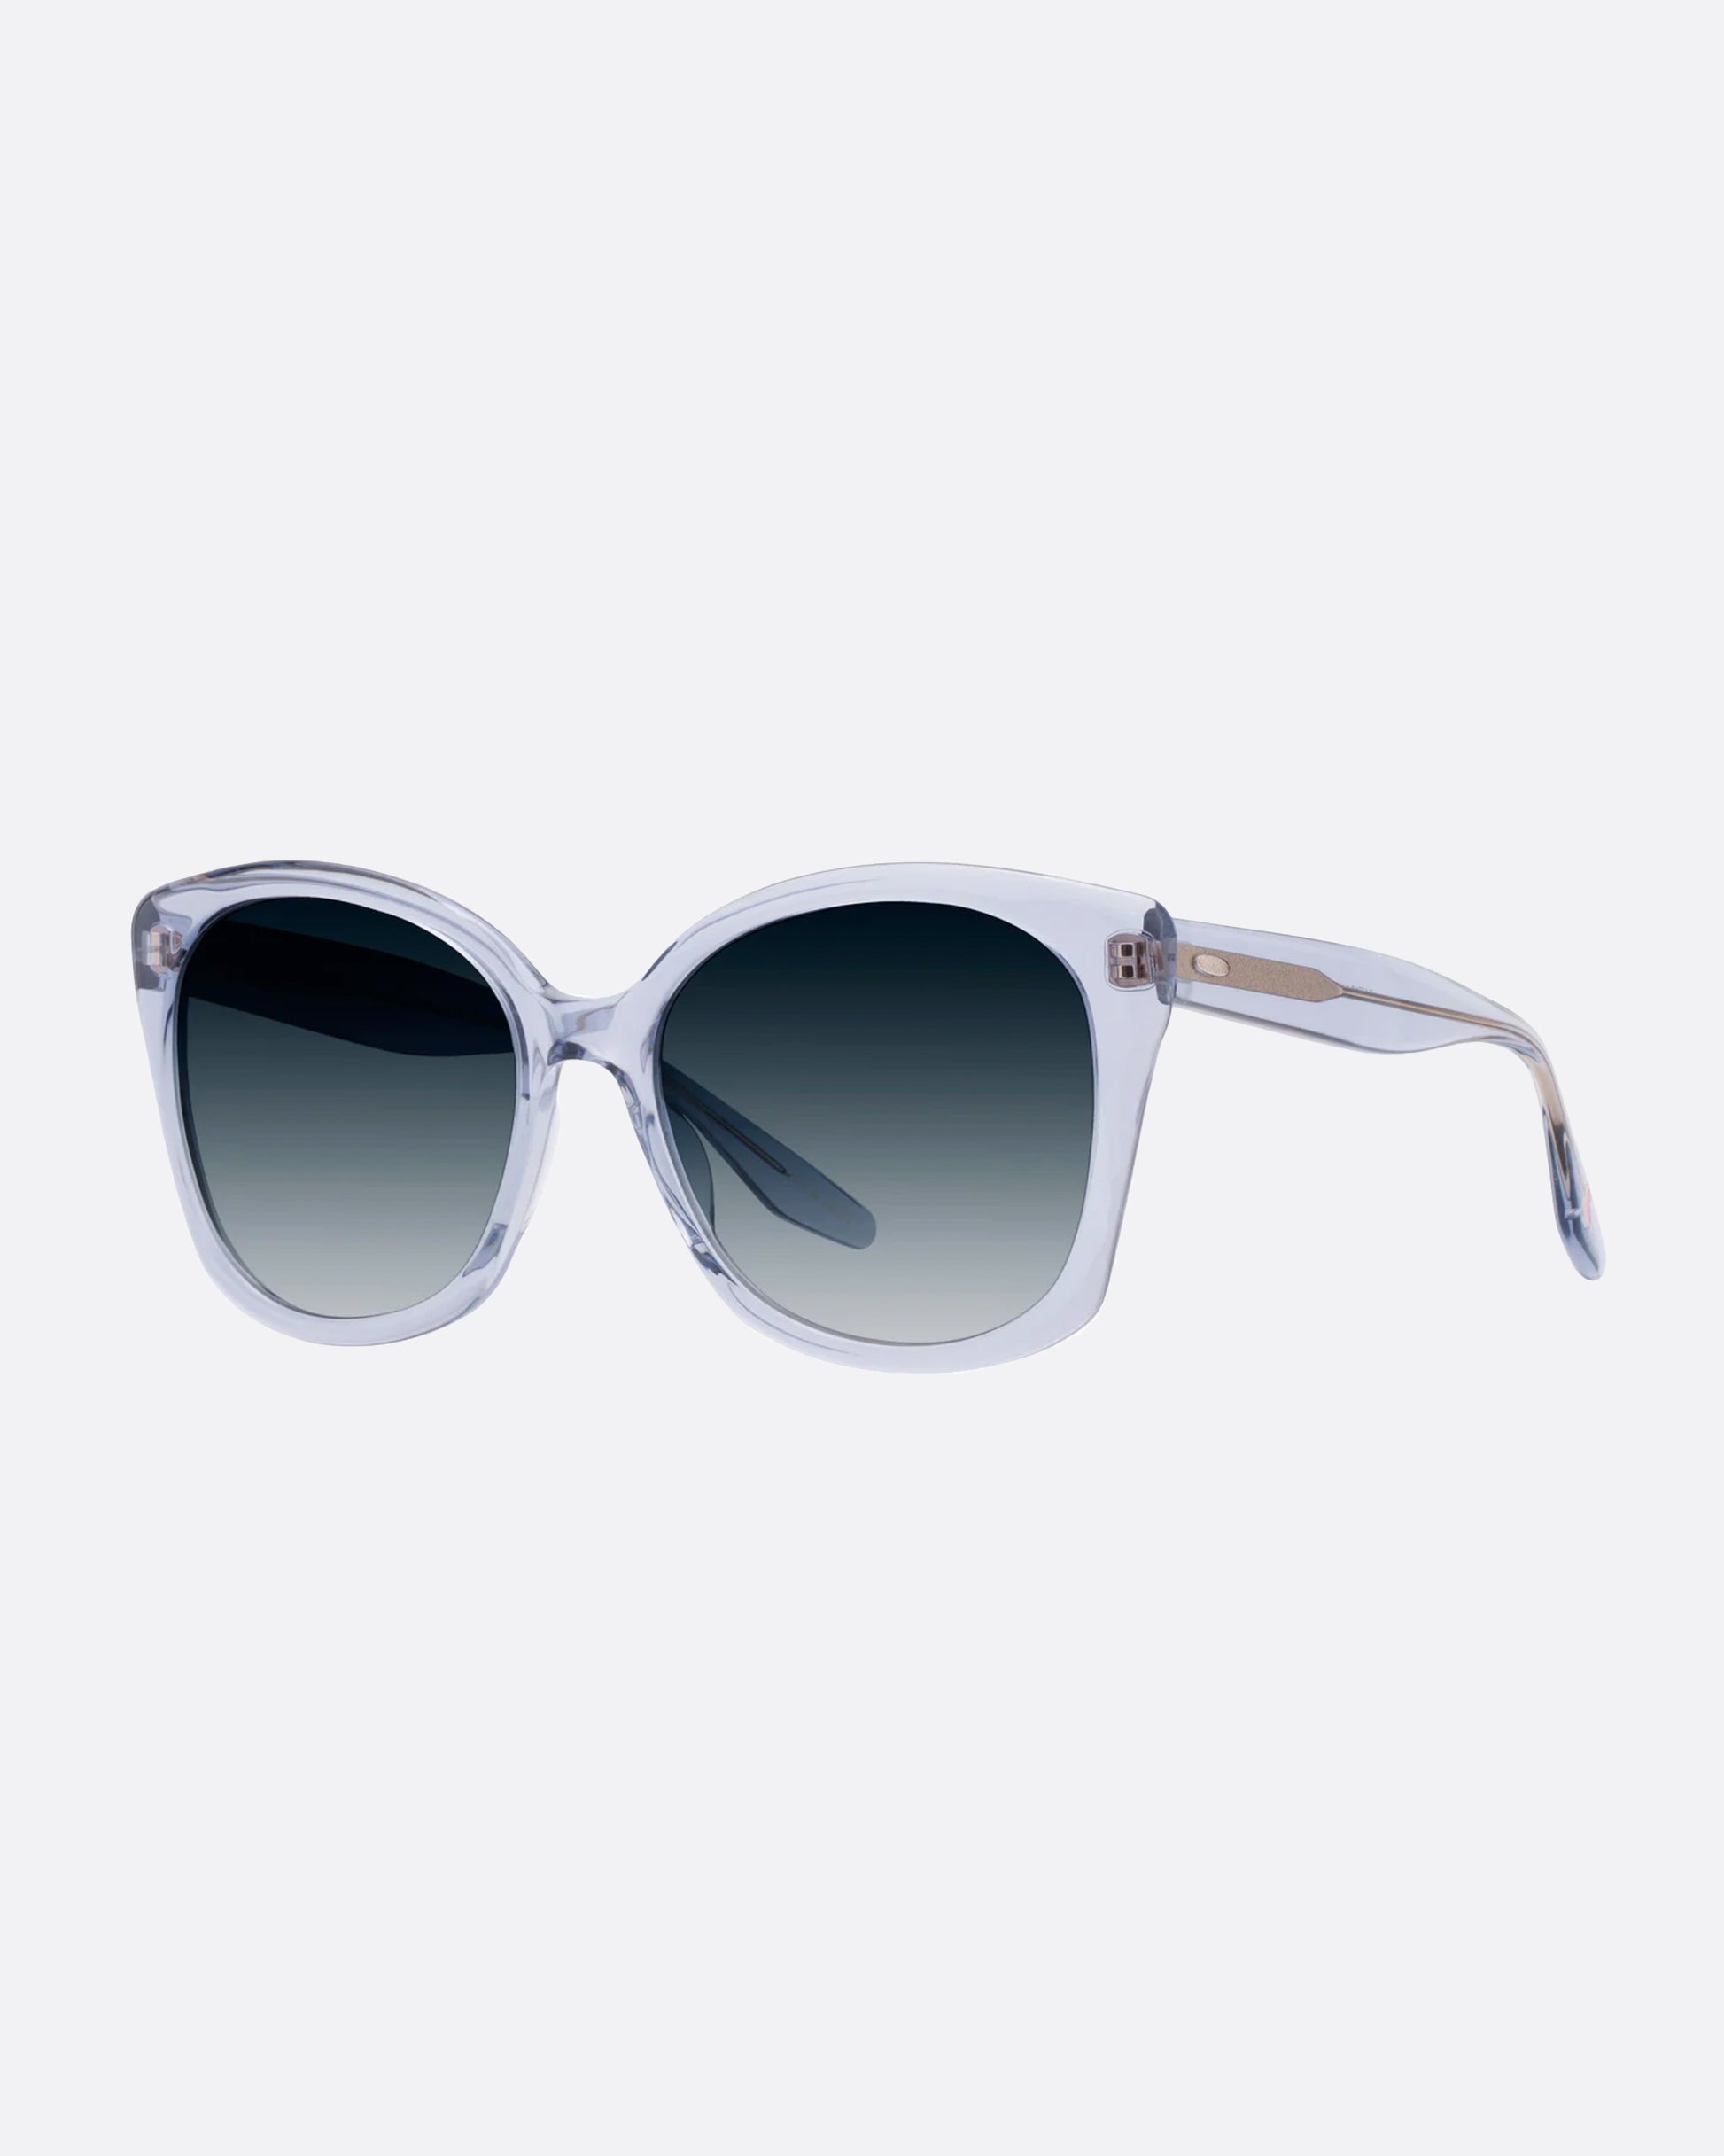 A pair of glamorous, oversized butterfly, cat-eye sunglasses. This time with blue smoke frames.